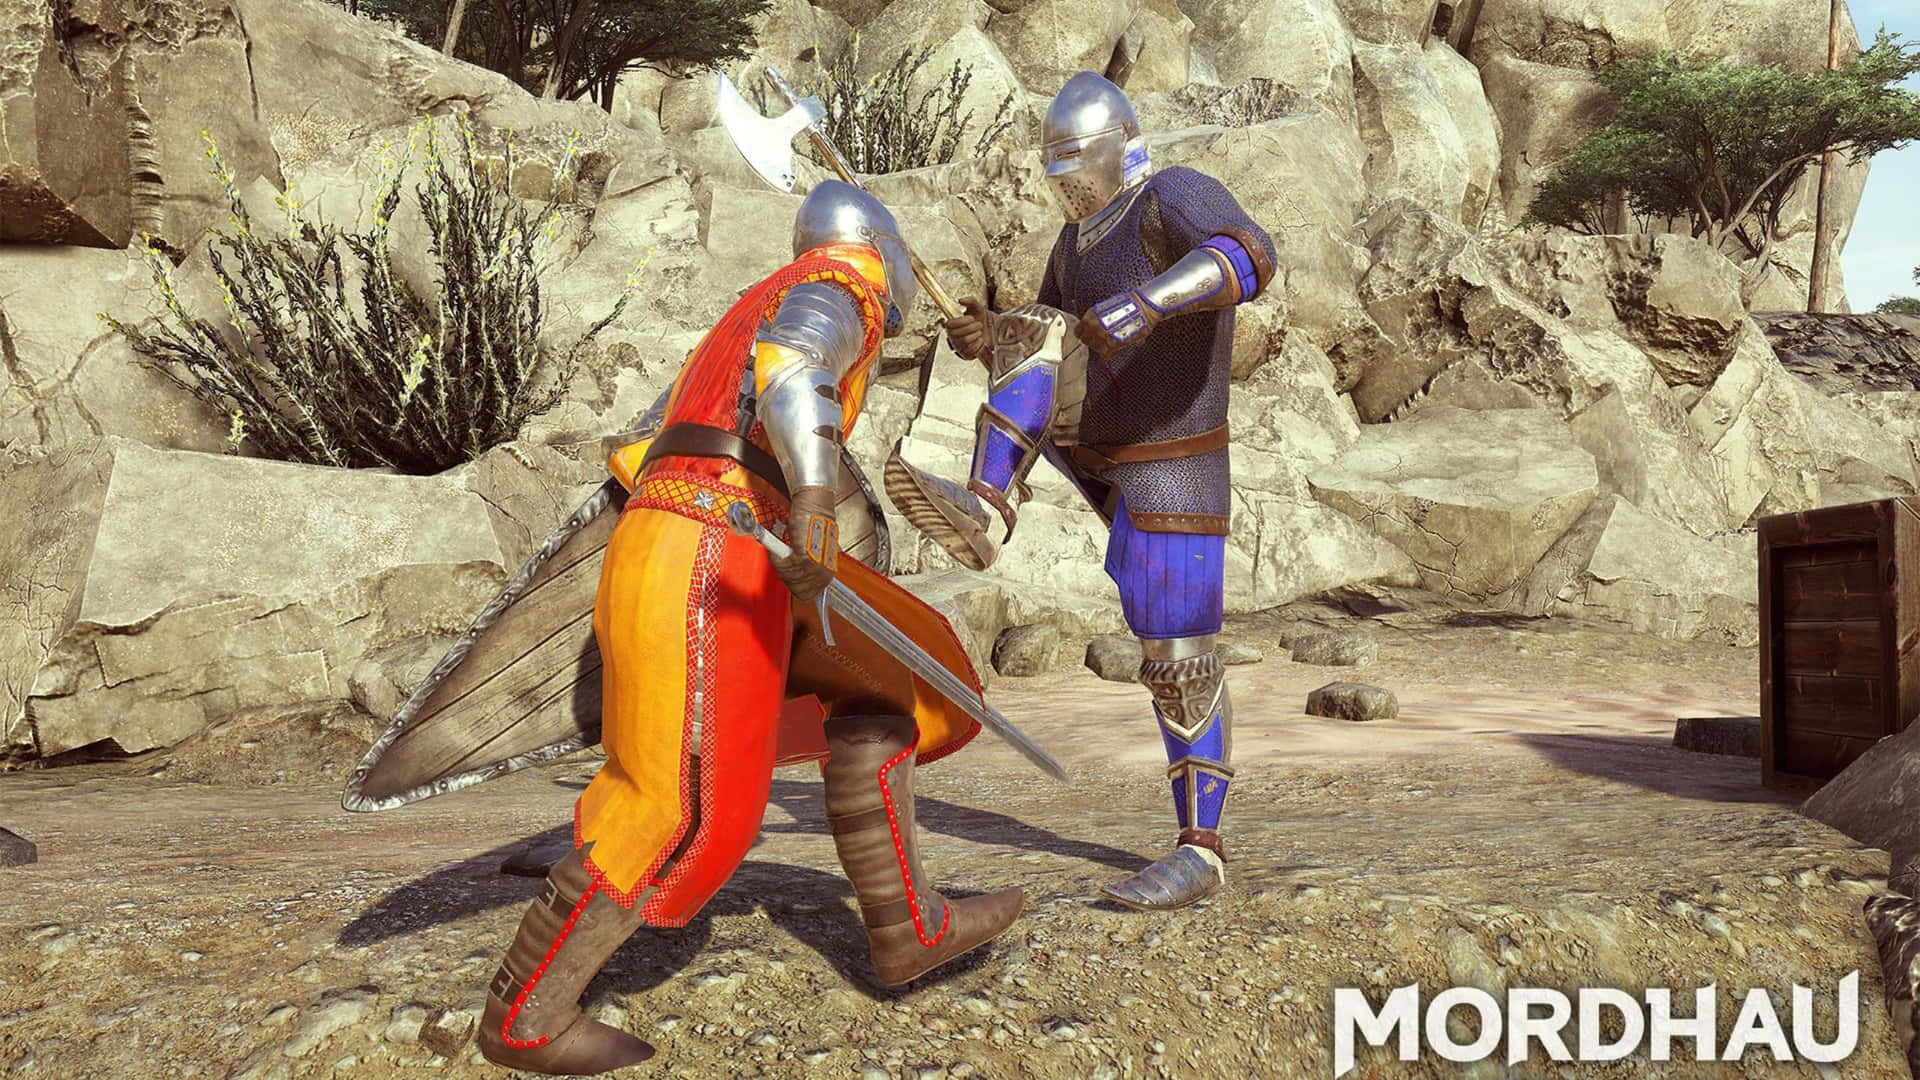 “Experience Intense Medieval Combat in 1440p with Mordhau”